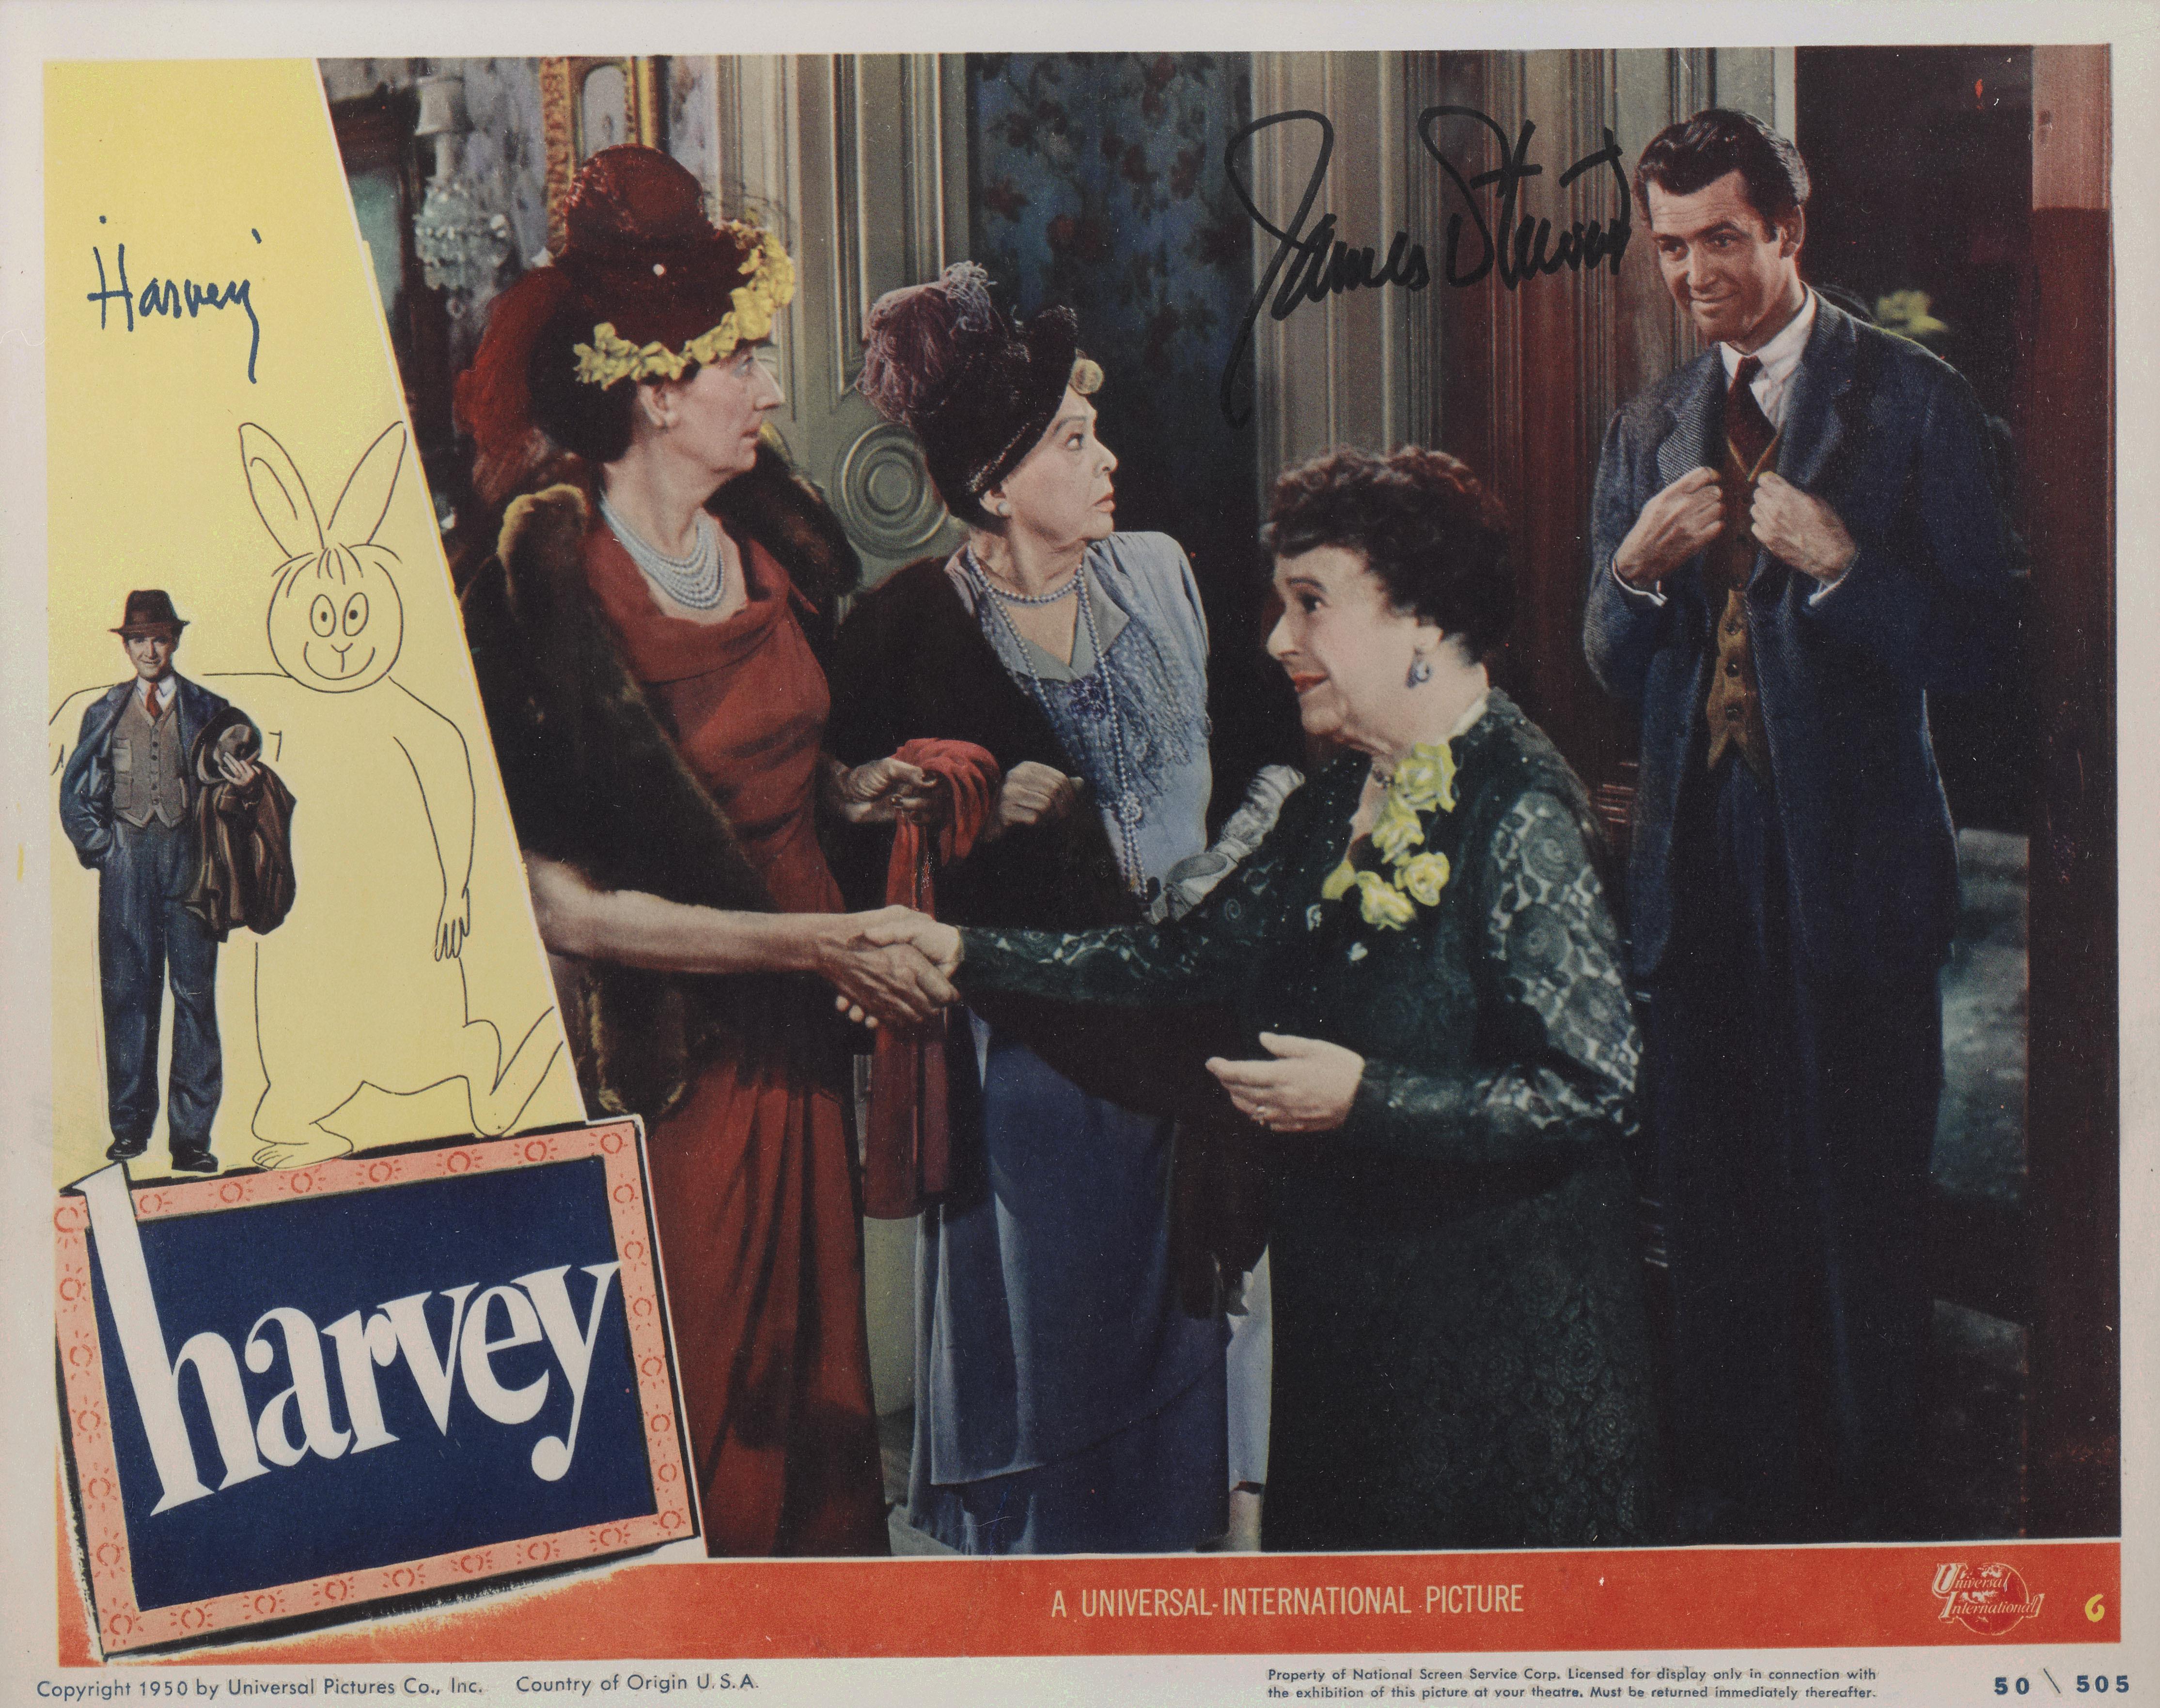 Original US Lobby card number 6 for Harvey, 1950.
This Lobby card has been signed by James Stewart.
This lobby card was previously in the collection of a US collector, who obtained the signature in person at the Motion Picture retirement home in